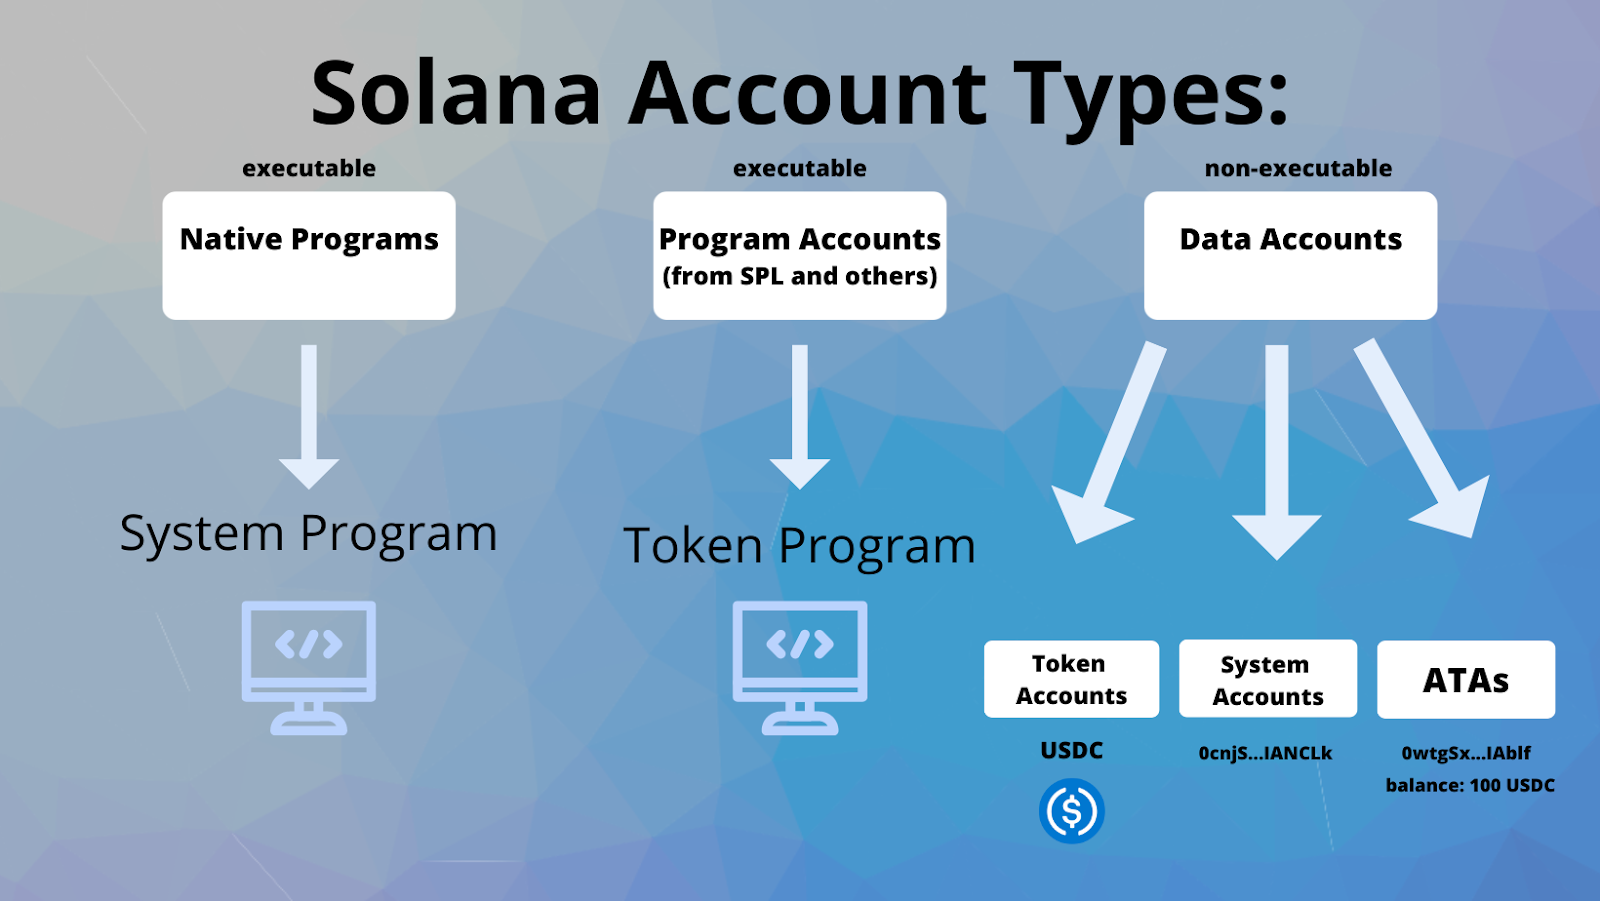 Solana account types and categories